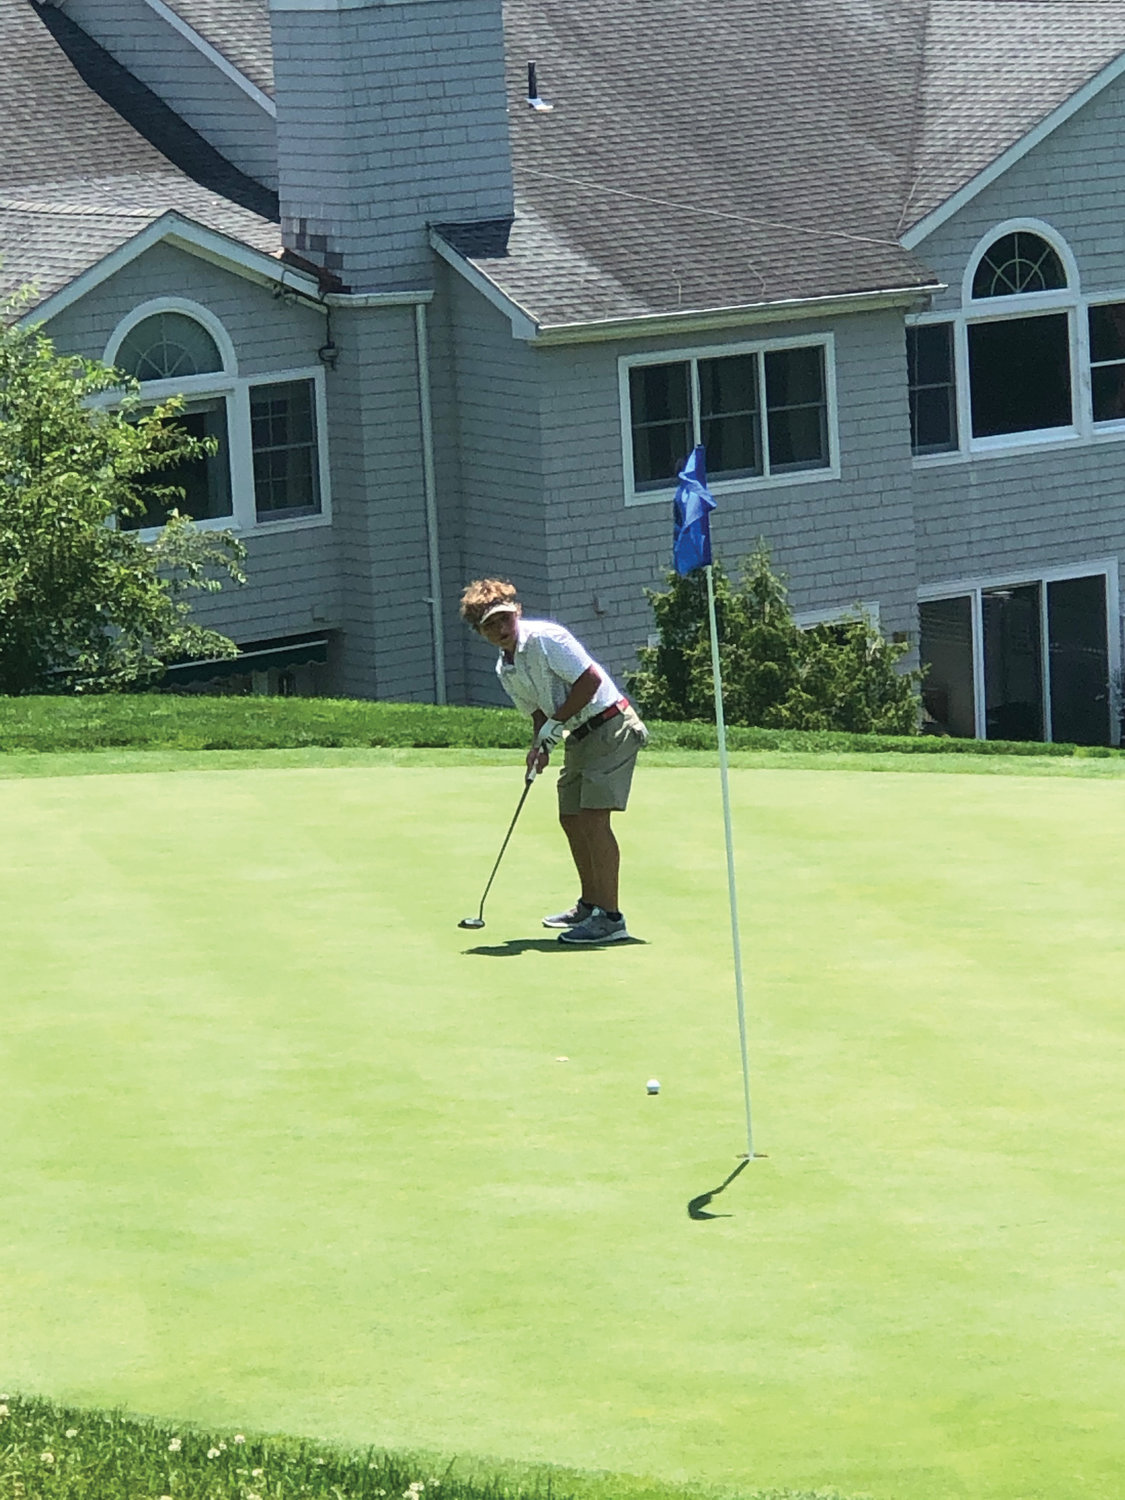 Matthew Clyman, a parishioner of St. Elizabeth Ann Seton in Shrub Oak, attempts a putt on his way to winning the seventh- and eighth-grade division at the Westchester Putnam CYO Junior Golf Outing at Pleasantville Country Club June 28.